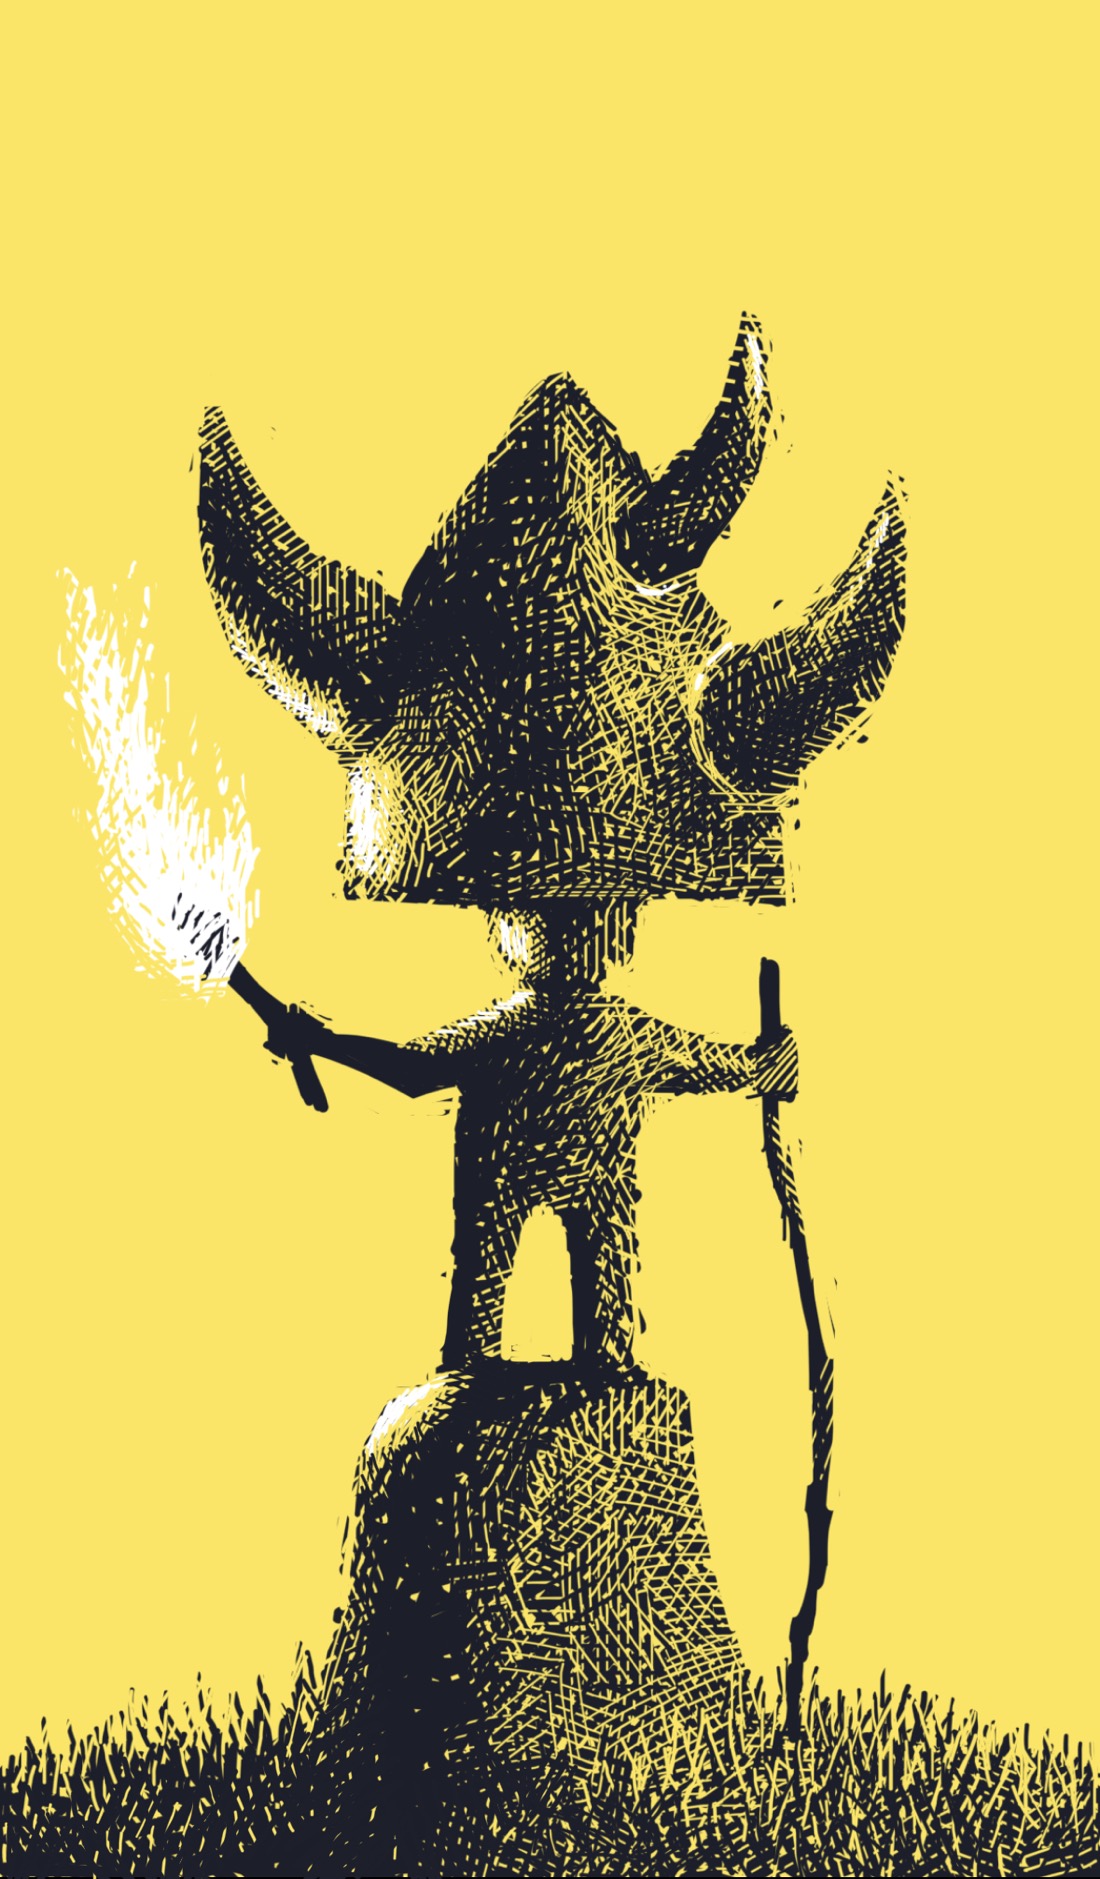 A stumpy stone pedestal stands in the middle of an empty grassy area. On the pedestal is a small, child-sized statue, arms out. The right hand holds a long, crooked staff reaching down to the ground; the left hand holds a flaming torch. The statue is wearing a giant pointed Viking-esque helmet with three horns on it. The helmet is about the size of the statue itself. The background and sky are empty, suggesting an open, barren area.